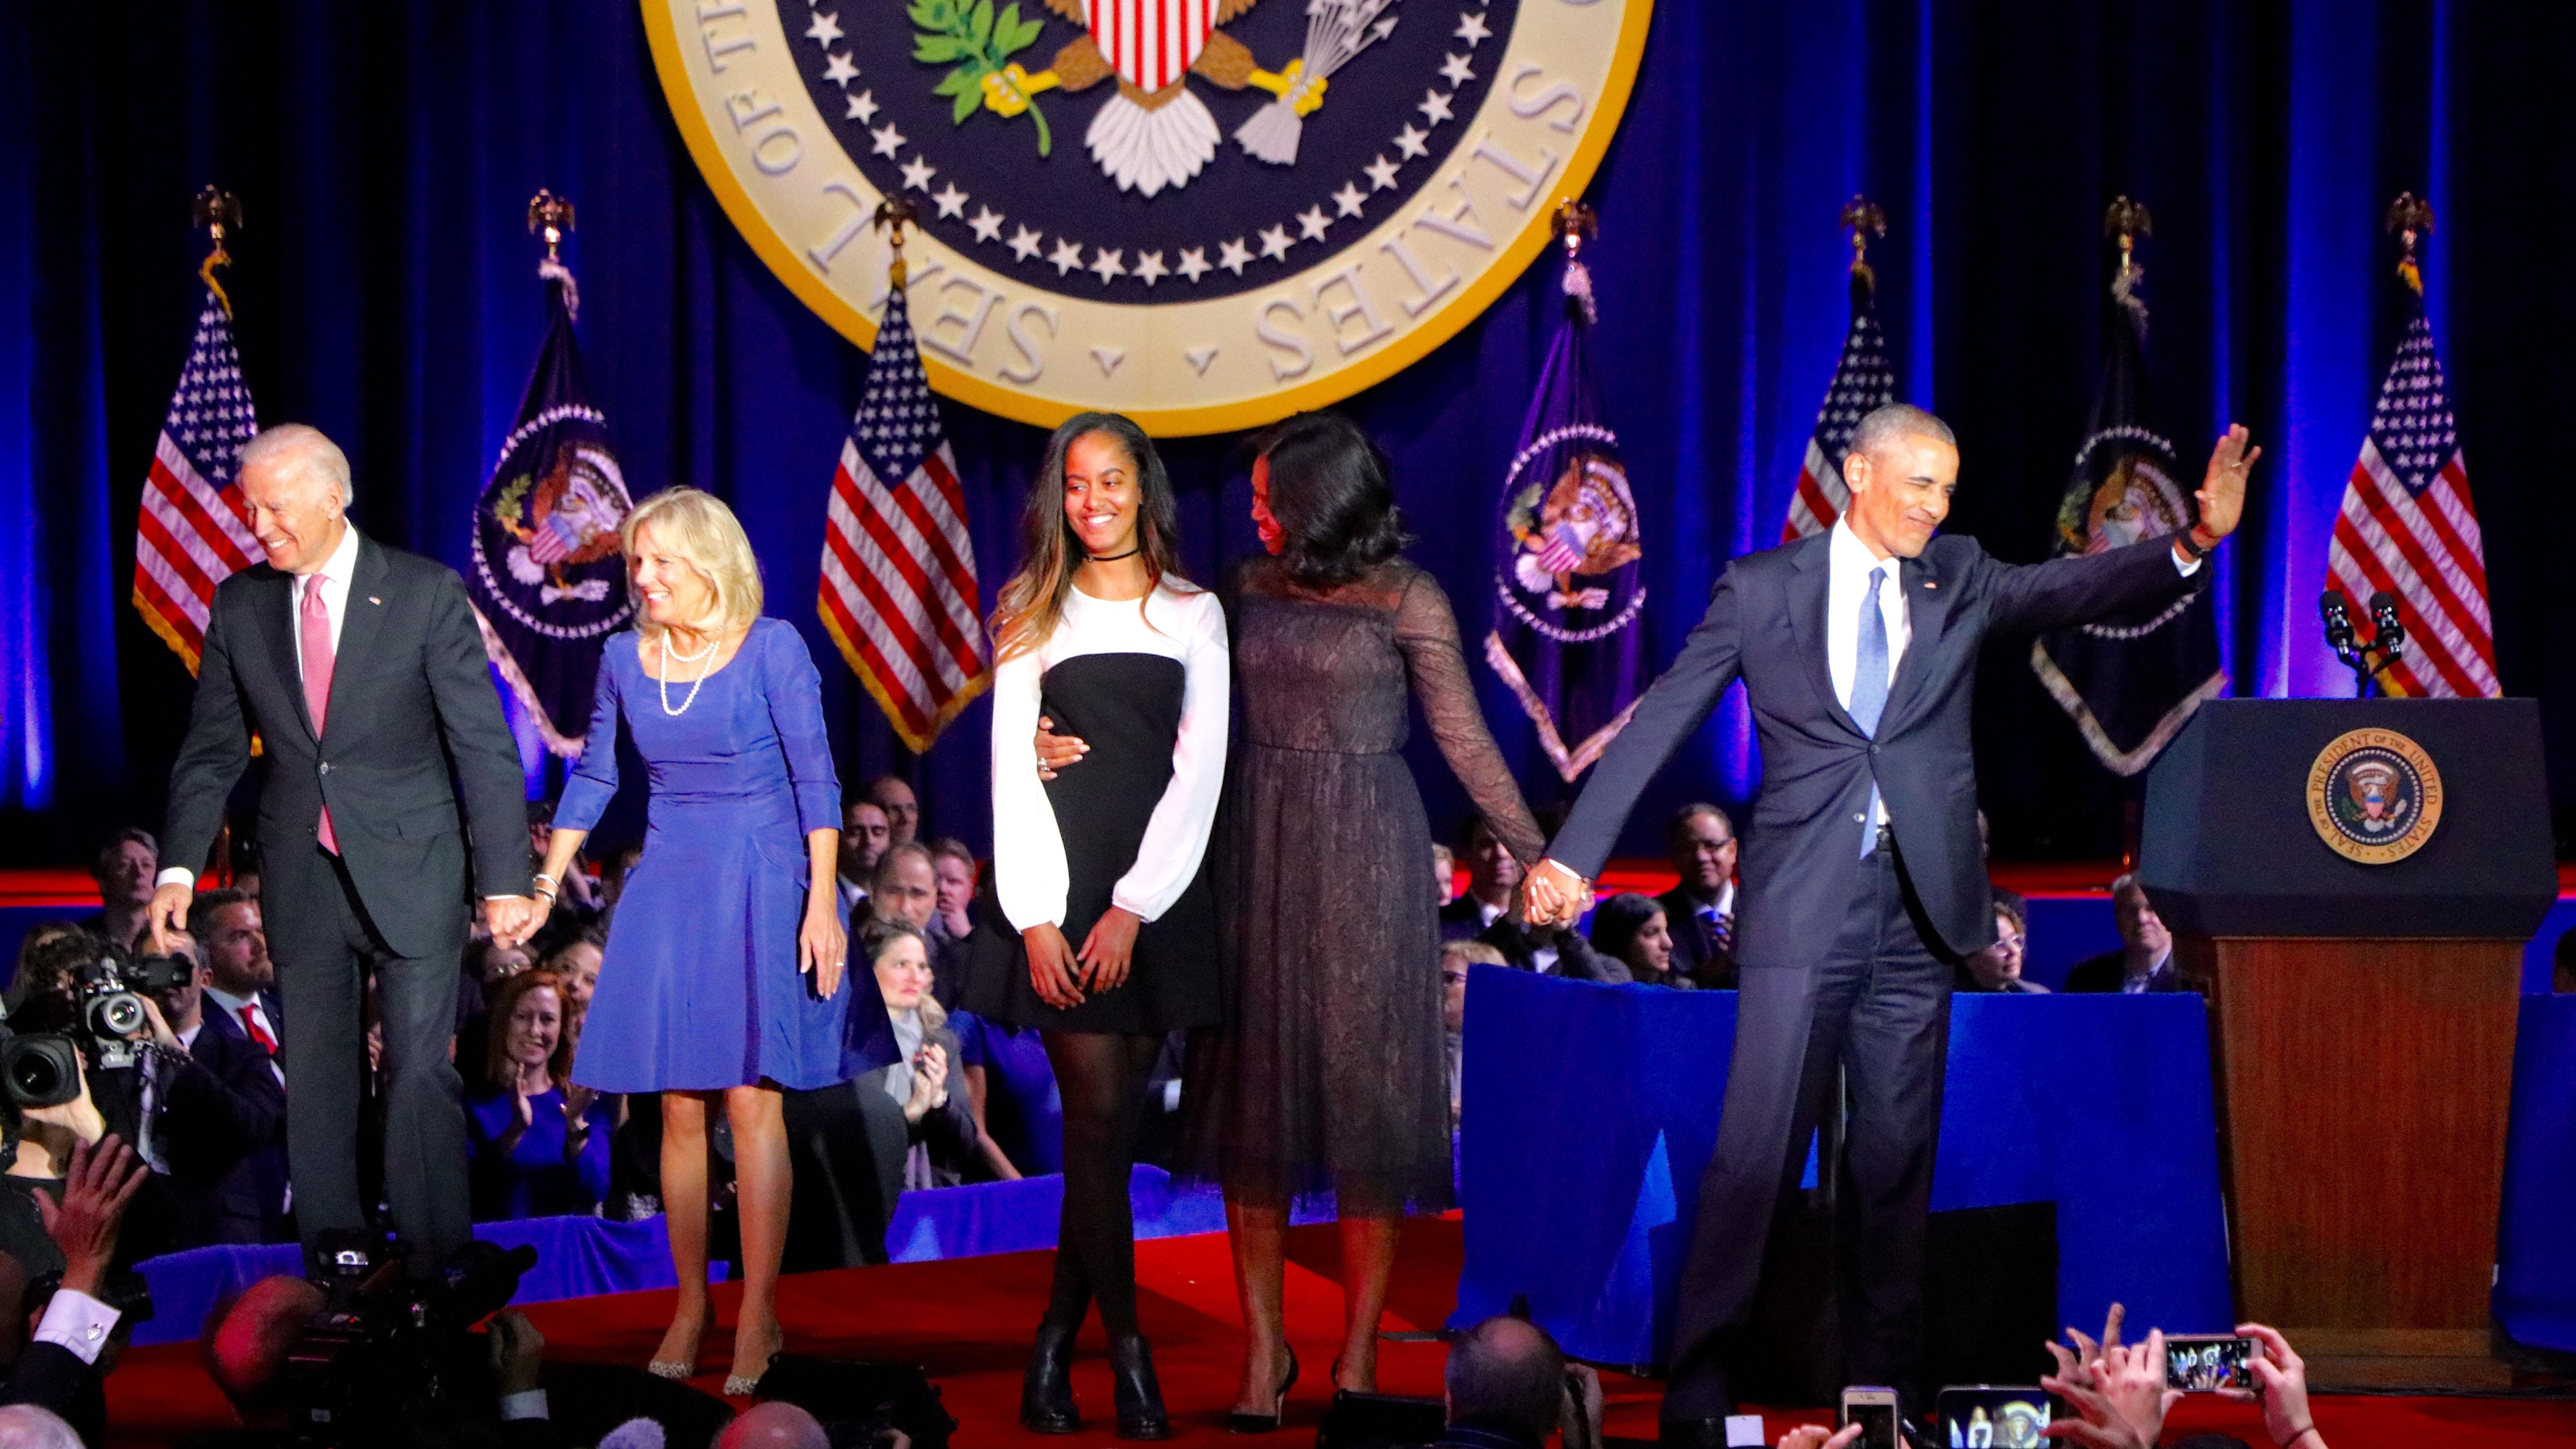 Vice President Joe Biden, Dr. Jill Biden, Malia Obama, First Lady Michelle Obama and President Barack Obama wave to the crowd at McCormick Place on Tuesday night. (Evan Garcia / Chicago Tonight)